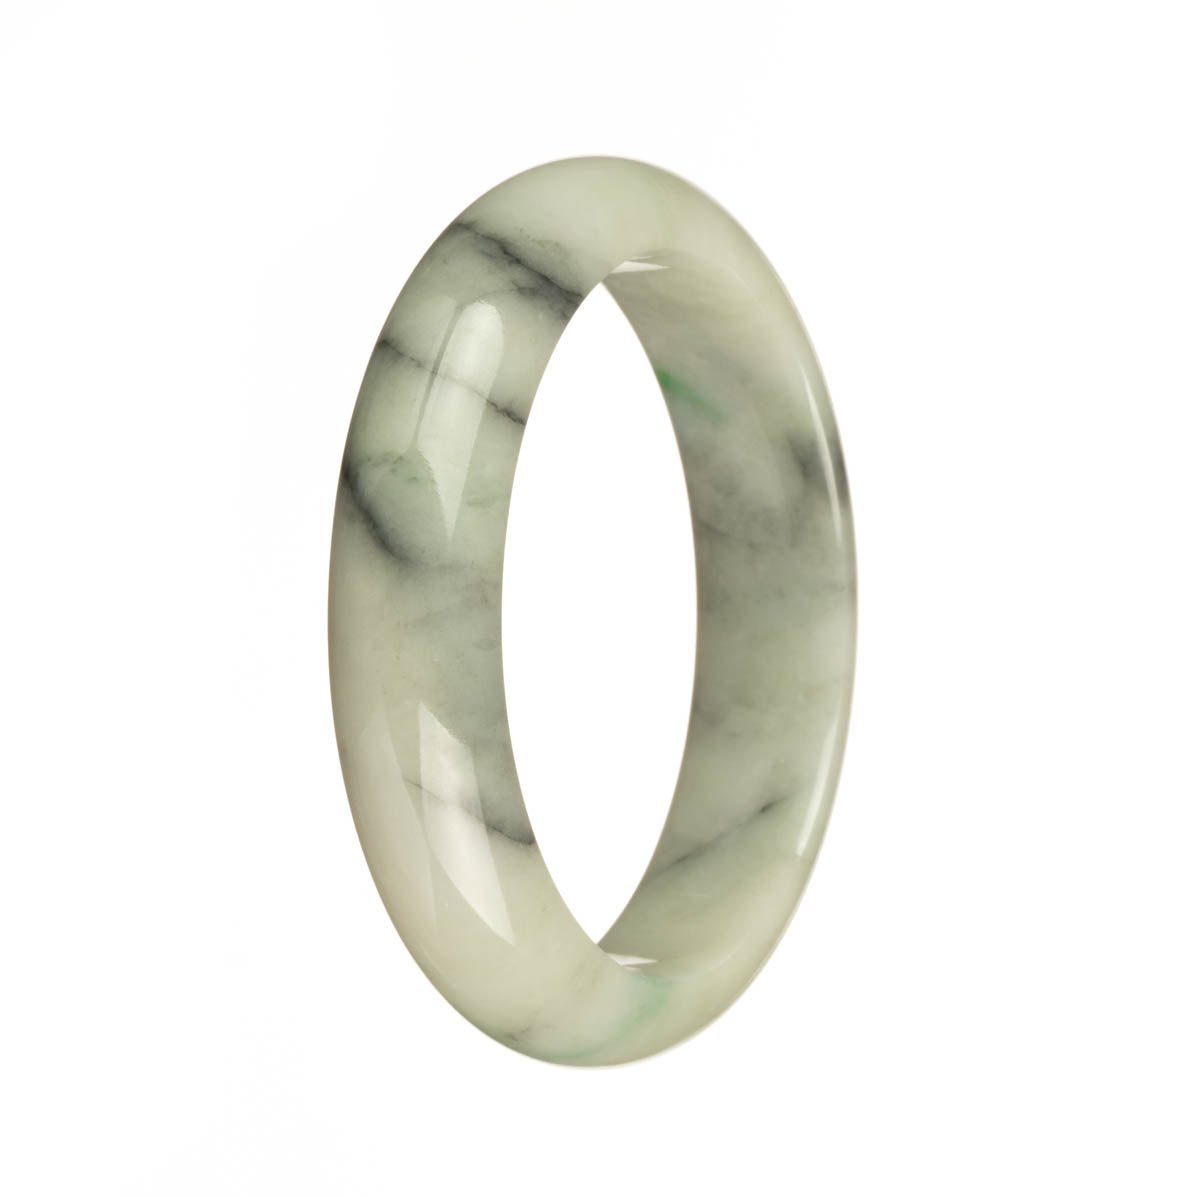 A half-moon shaped Burmese jade bangle bracelet with authentic Grade A white jade featuring intricate black and apple green patterns.